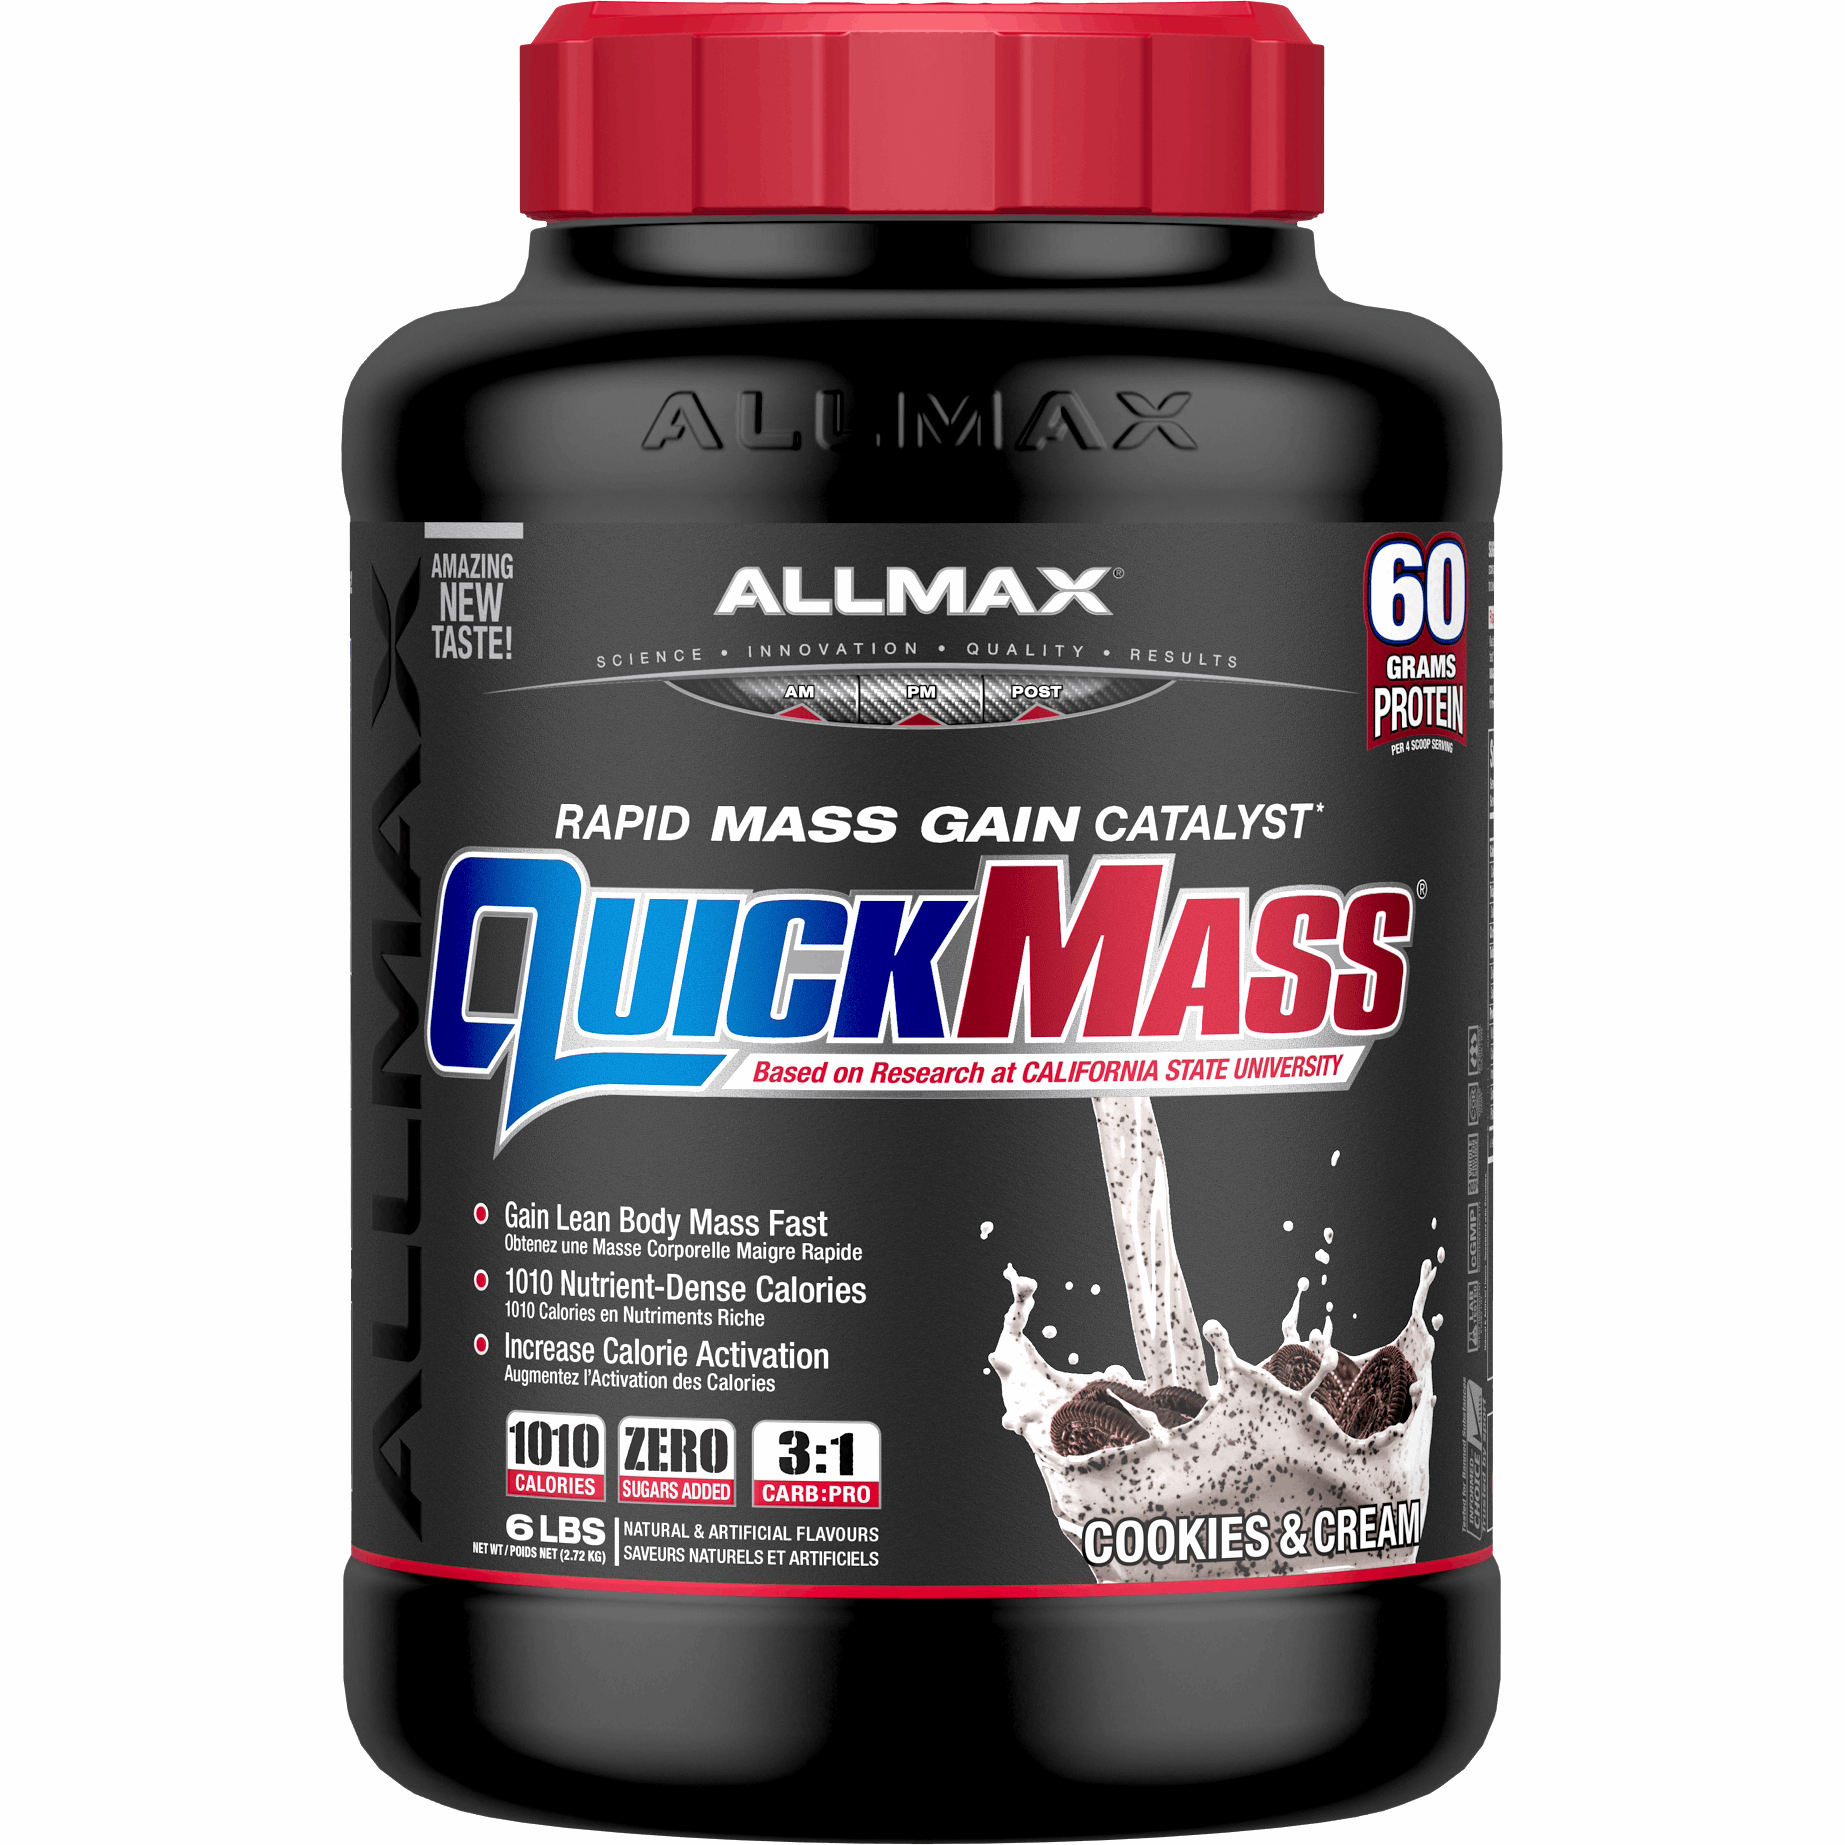 ALLMAX Quickmass (6 LBS) Mass Gainers Cookies and Cream Allmax Nutrition